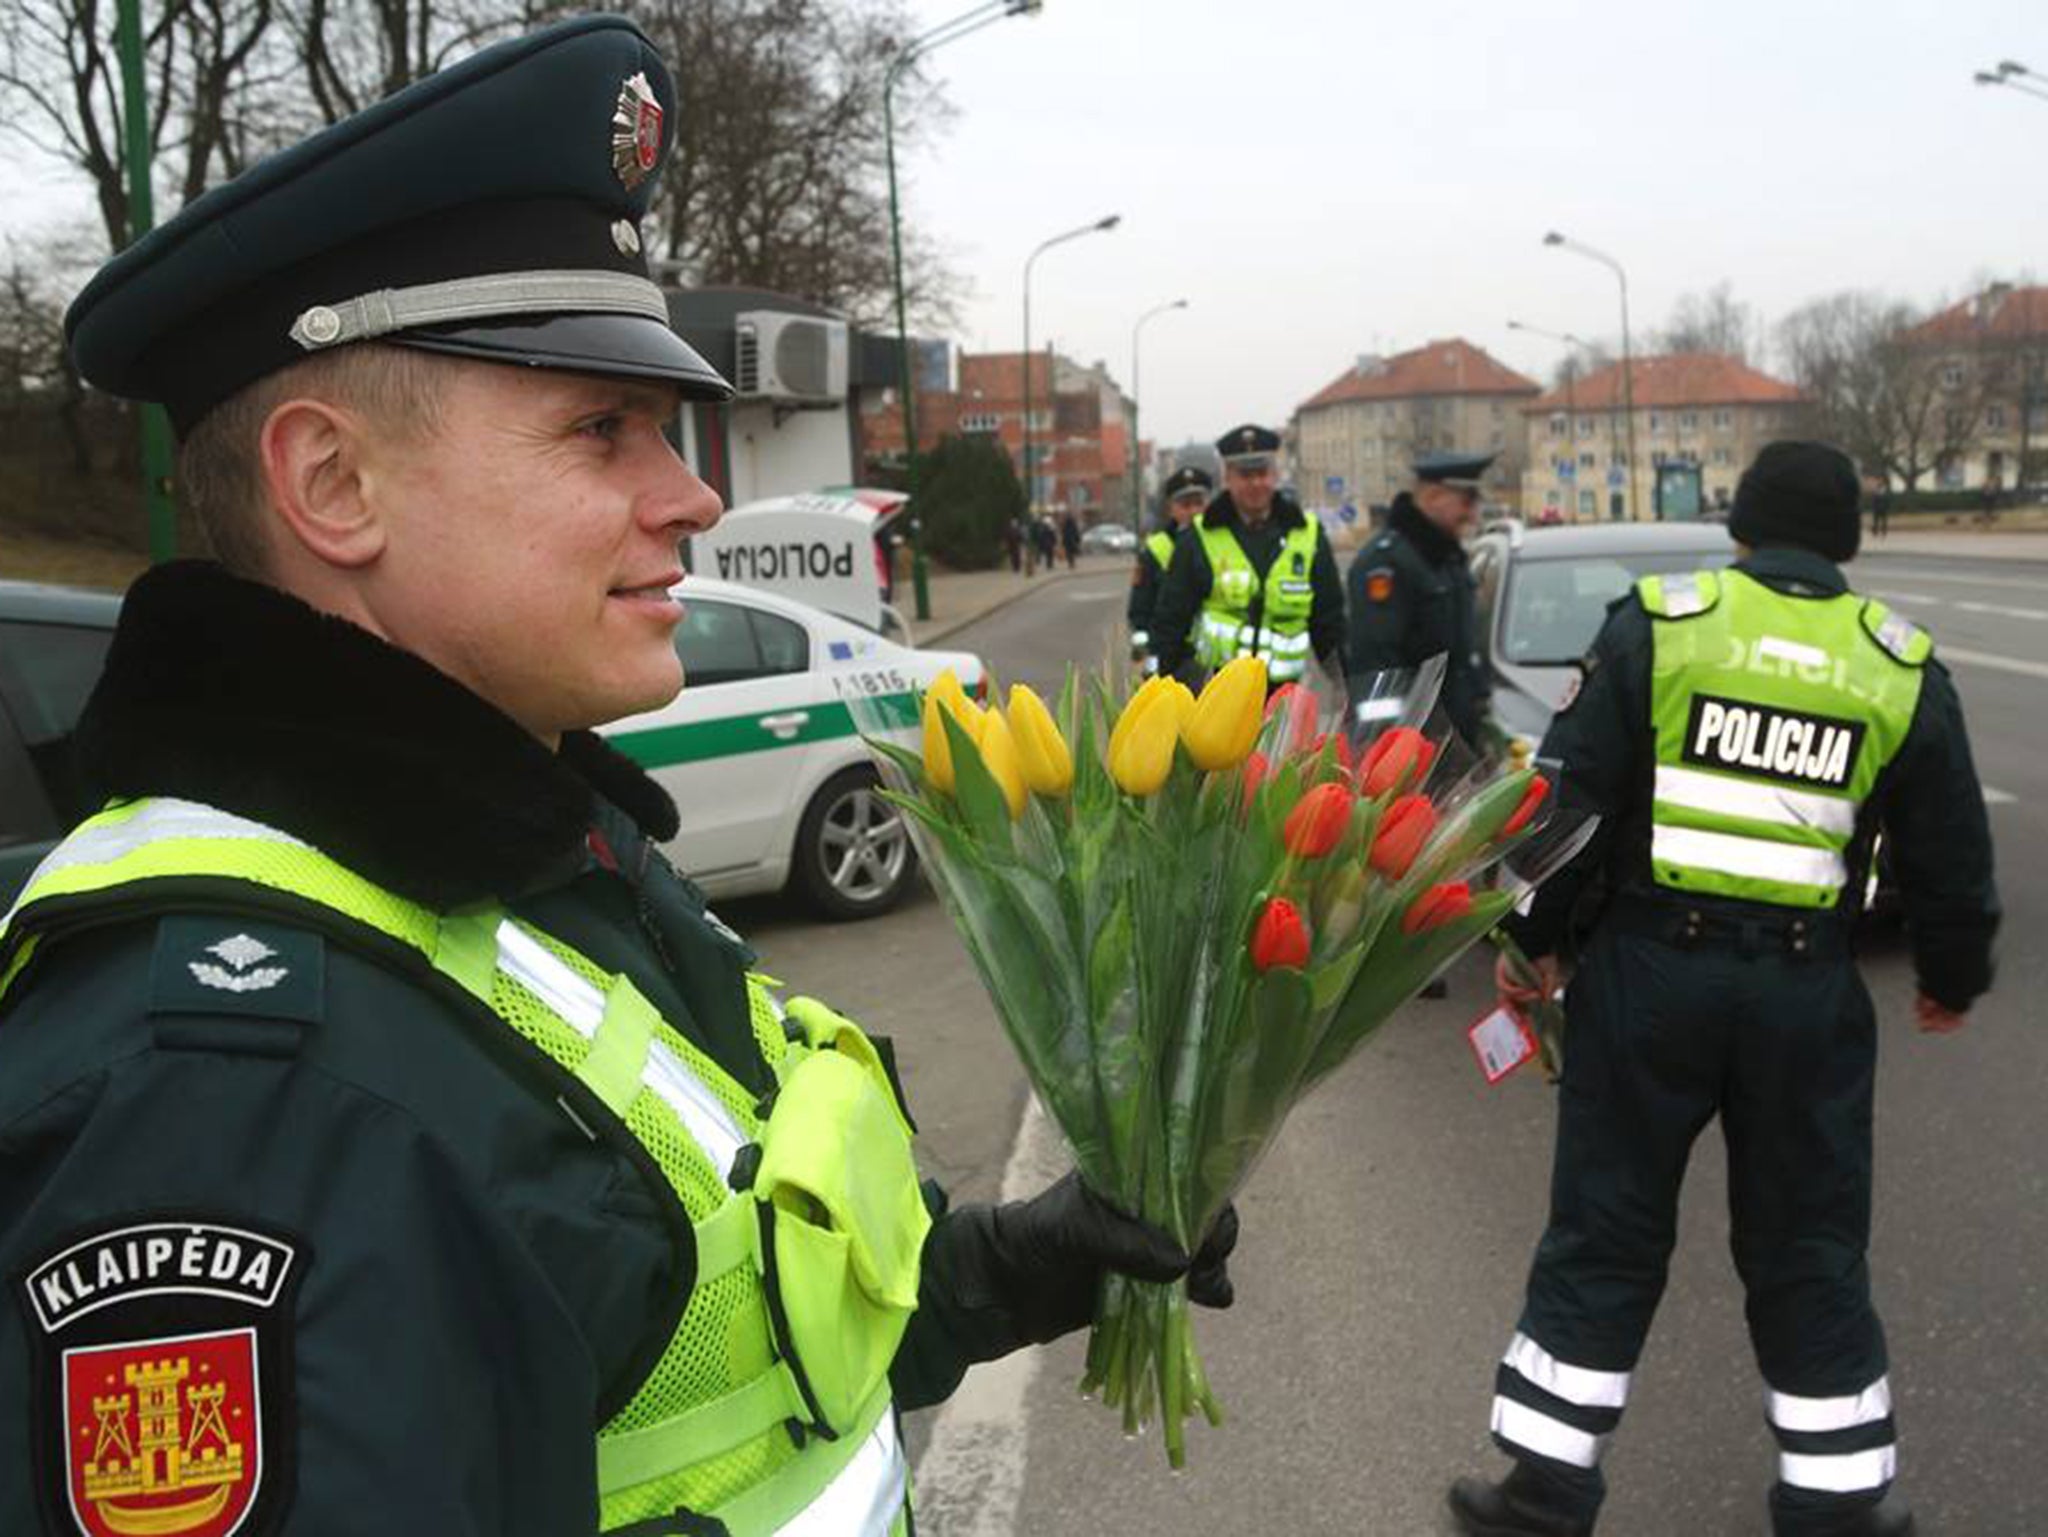 Police in Lithuania celebrate International Women's Day